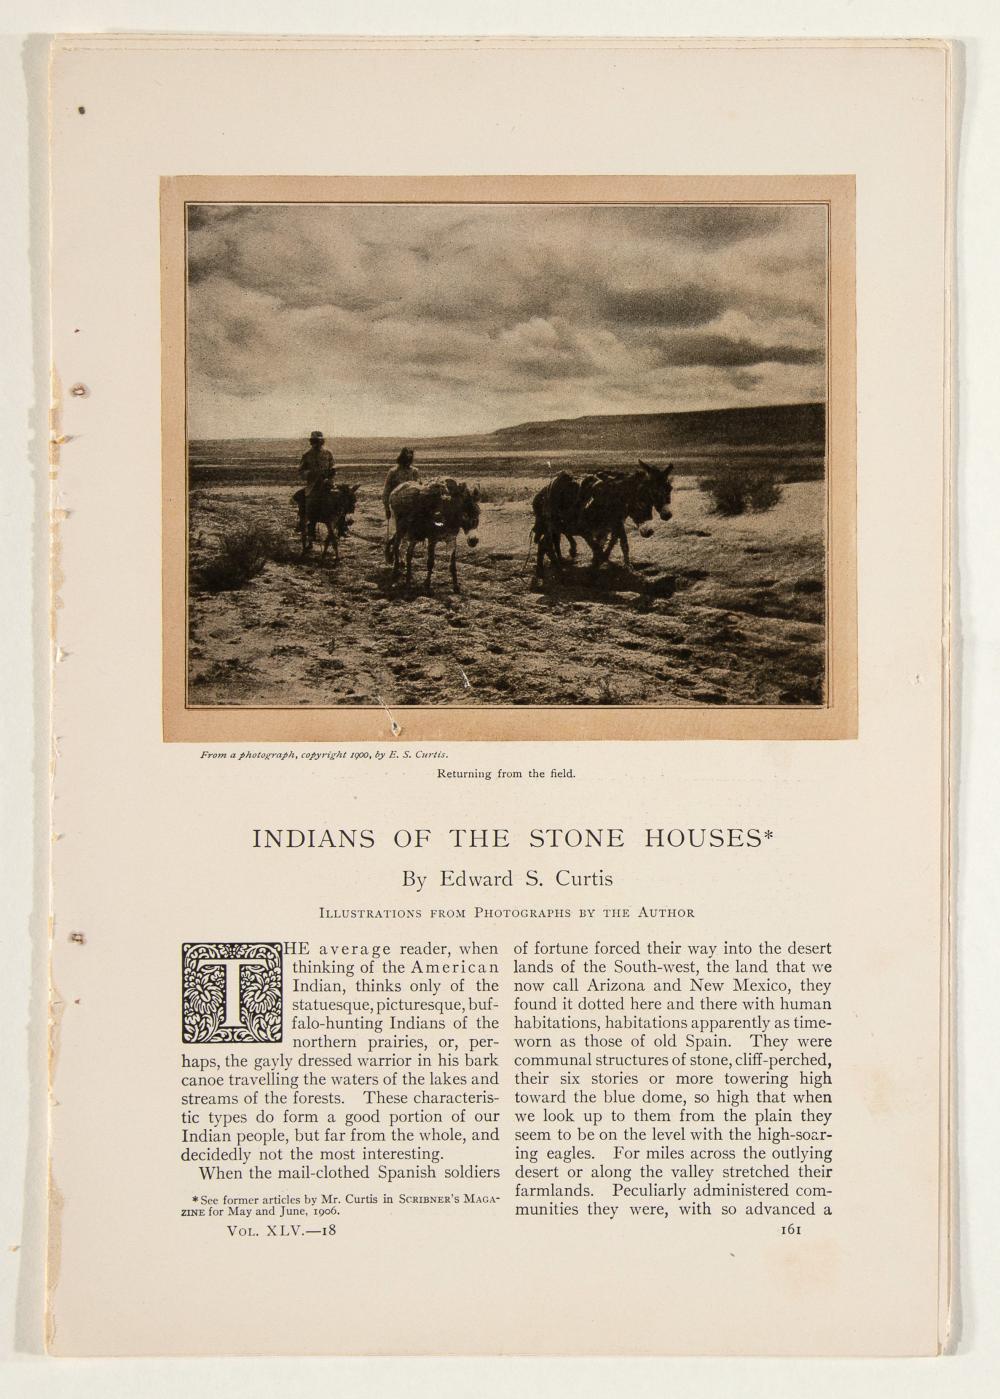 EDWARD S. CURTIS, INDIANS OF THE